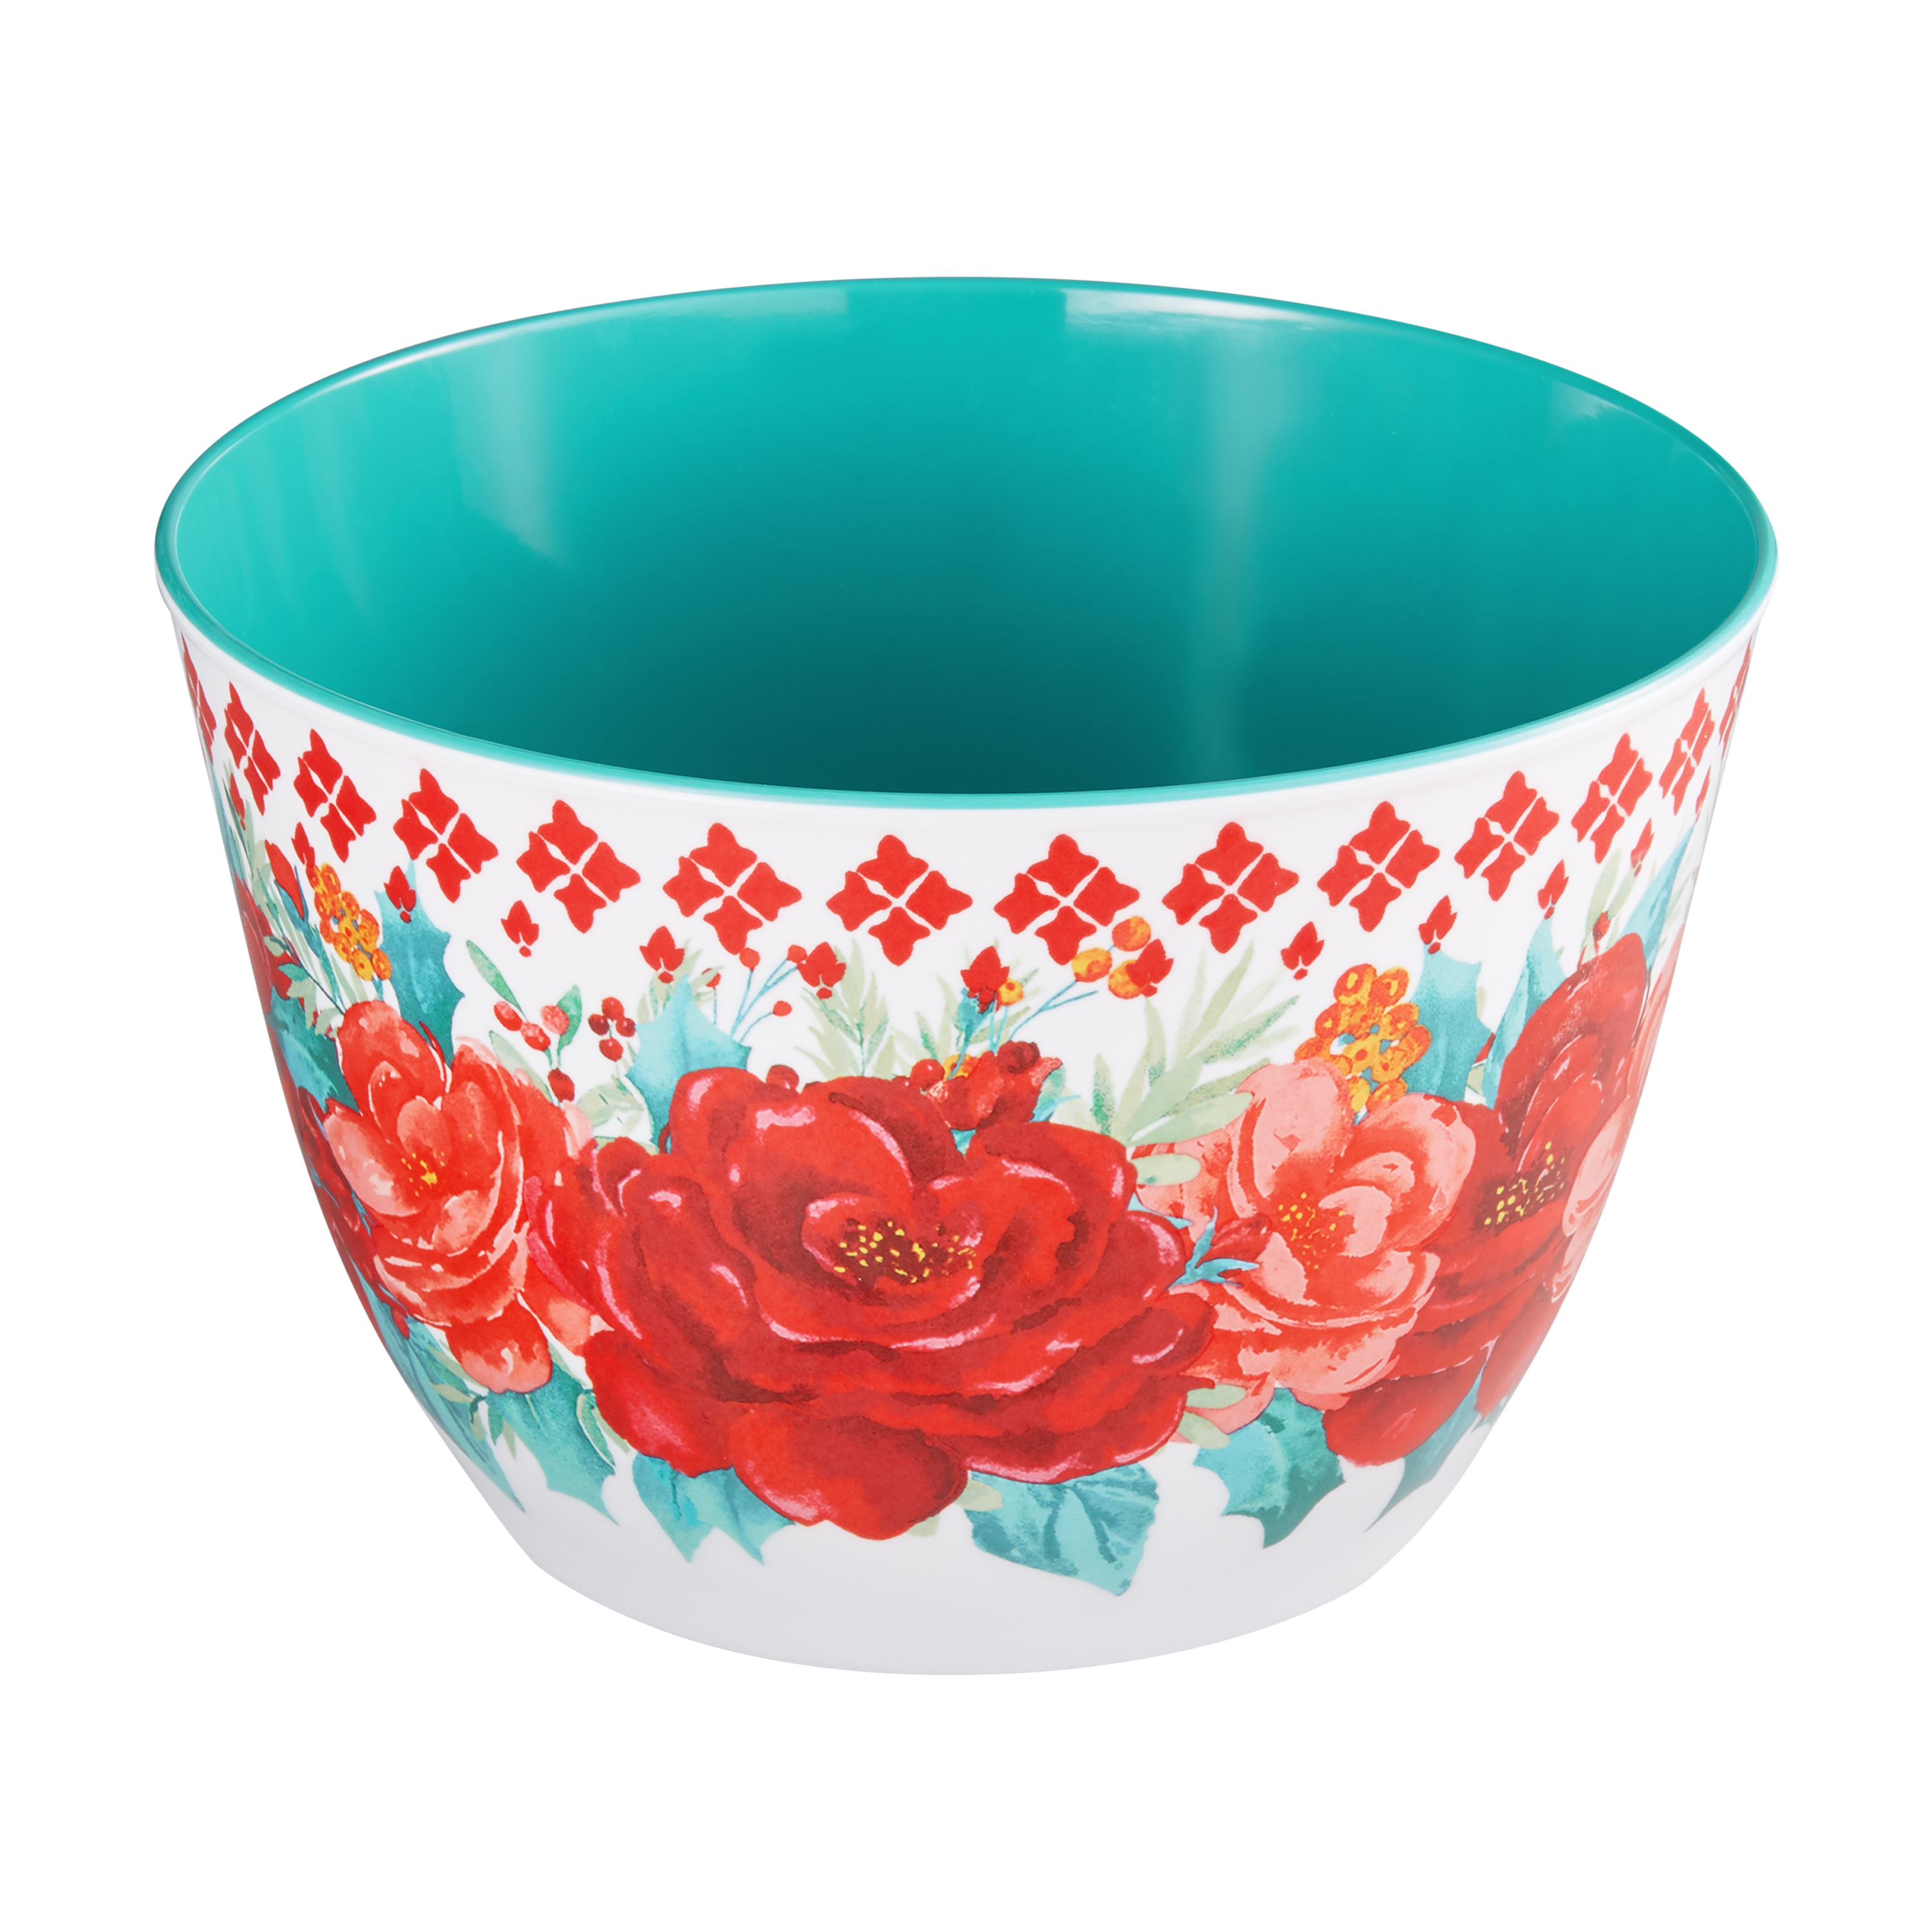 The Pioneer Woman 10-Piece Melamine Batter Bowl Set, Holiday Floral Red - image 4 of 16